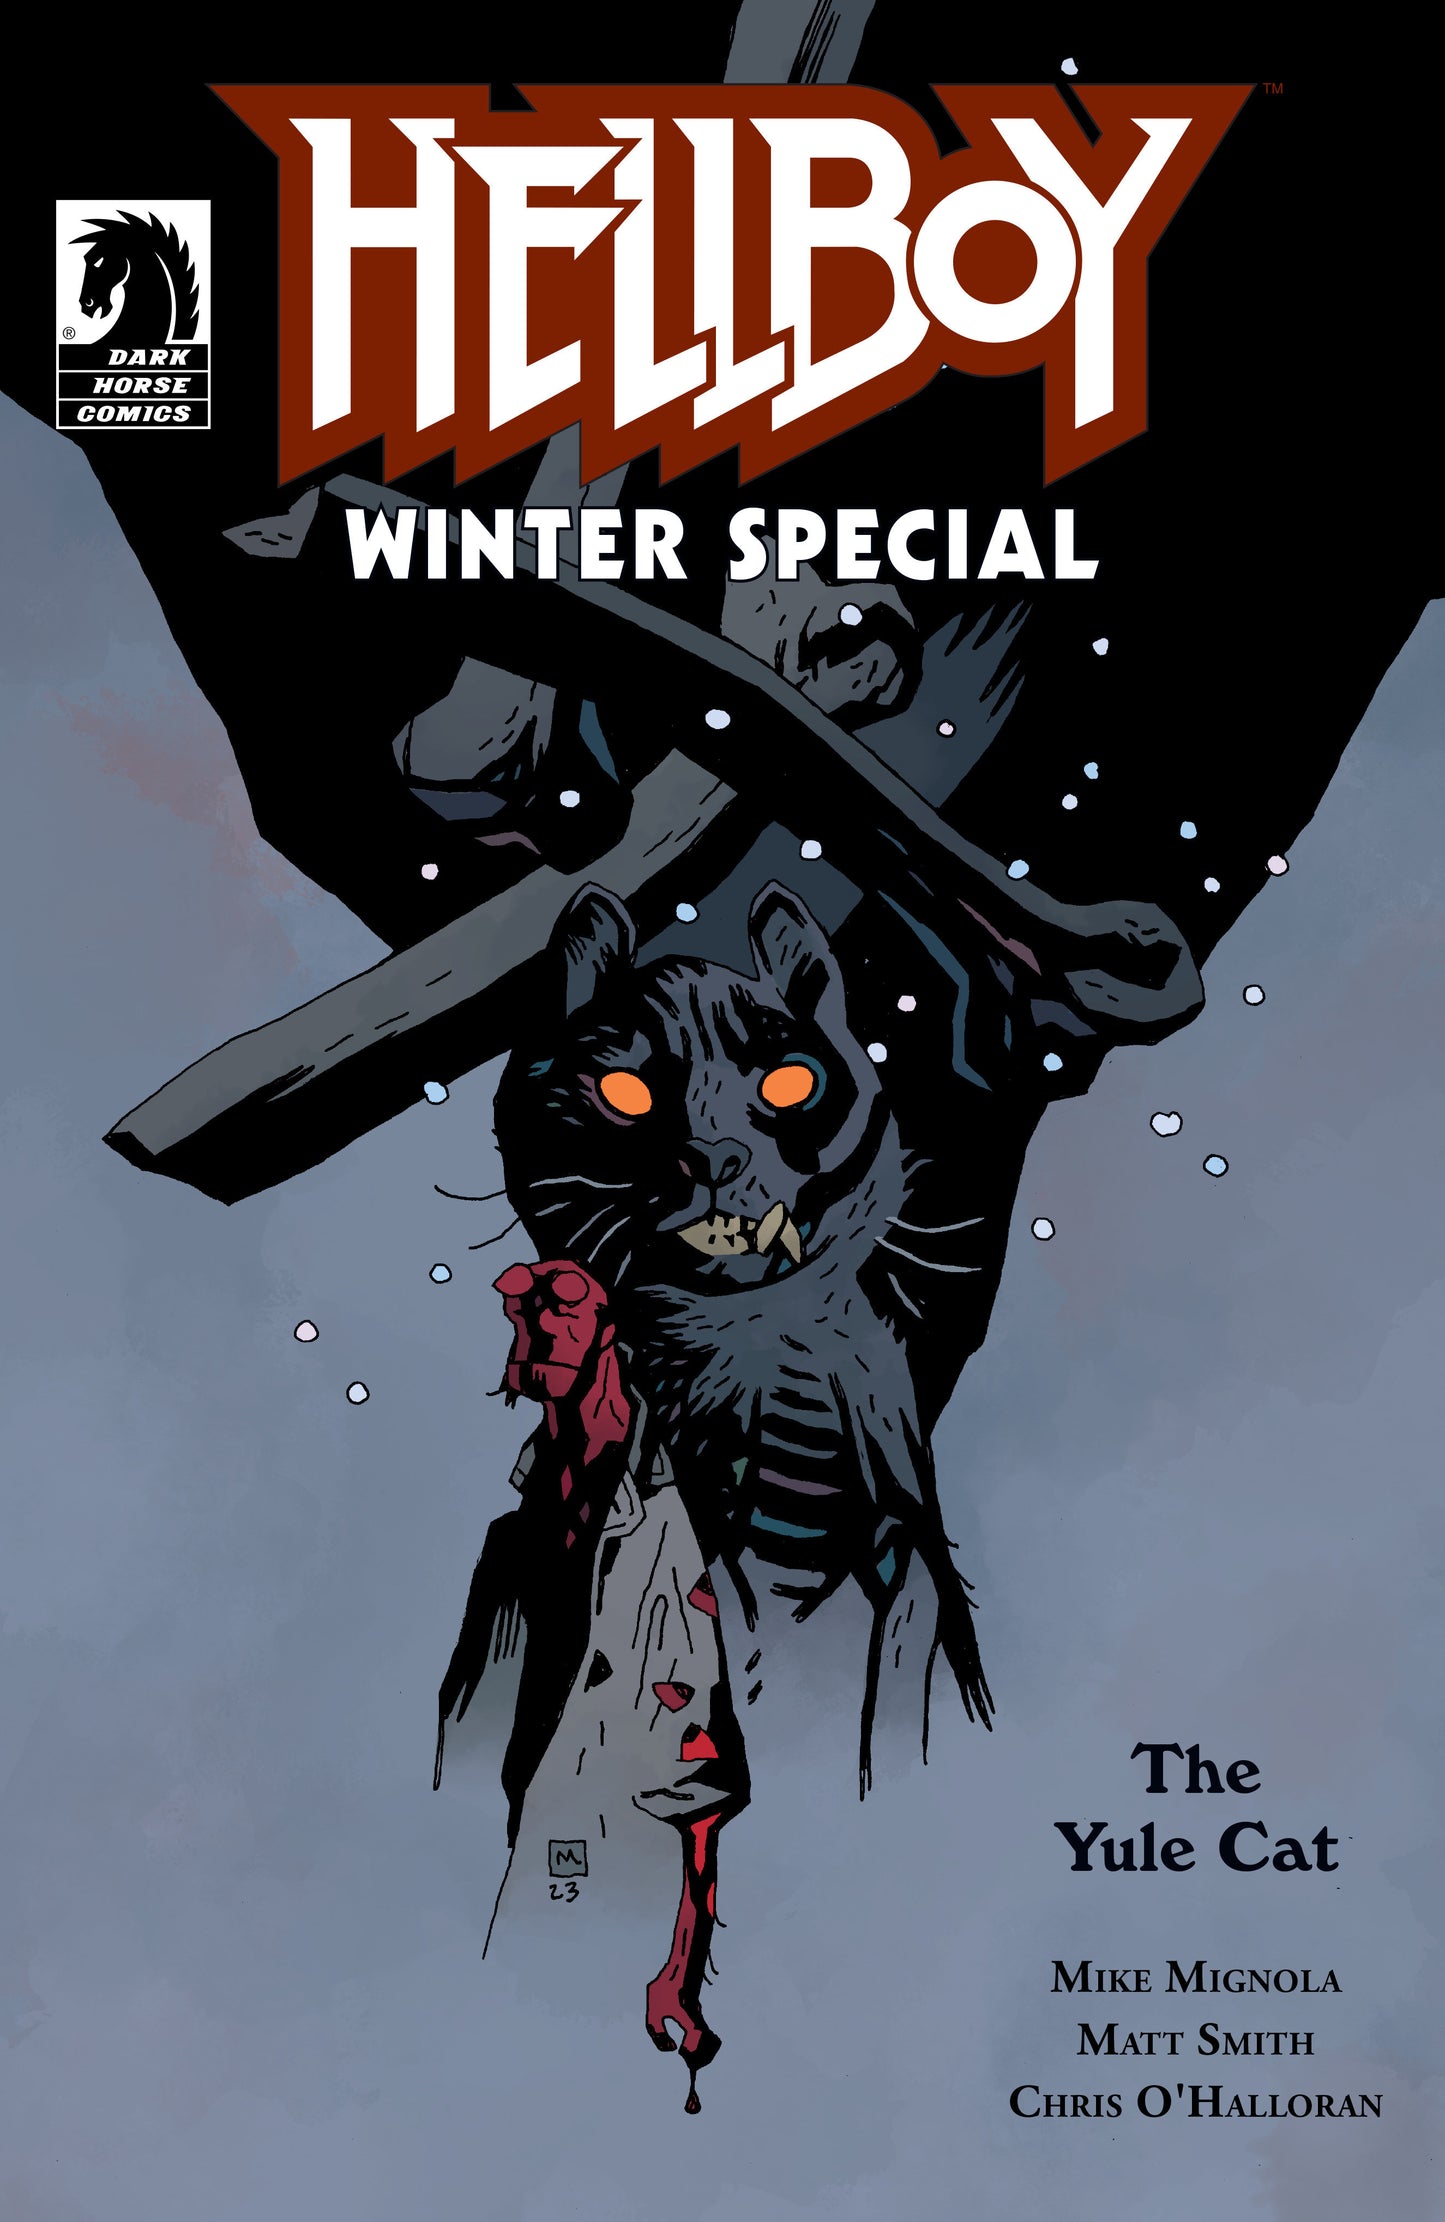 Hellboy Winter Special: The Yule Cat One-Shot (Cover B) (Mike Mignola)